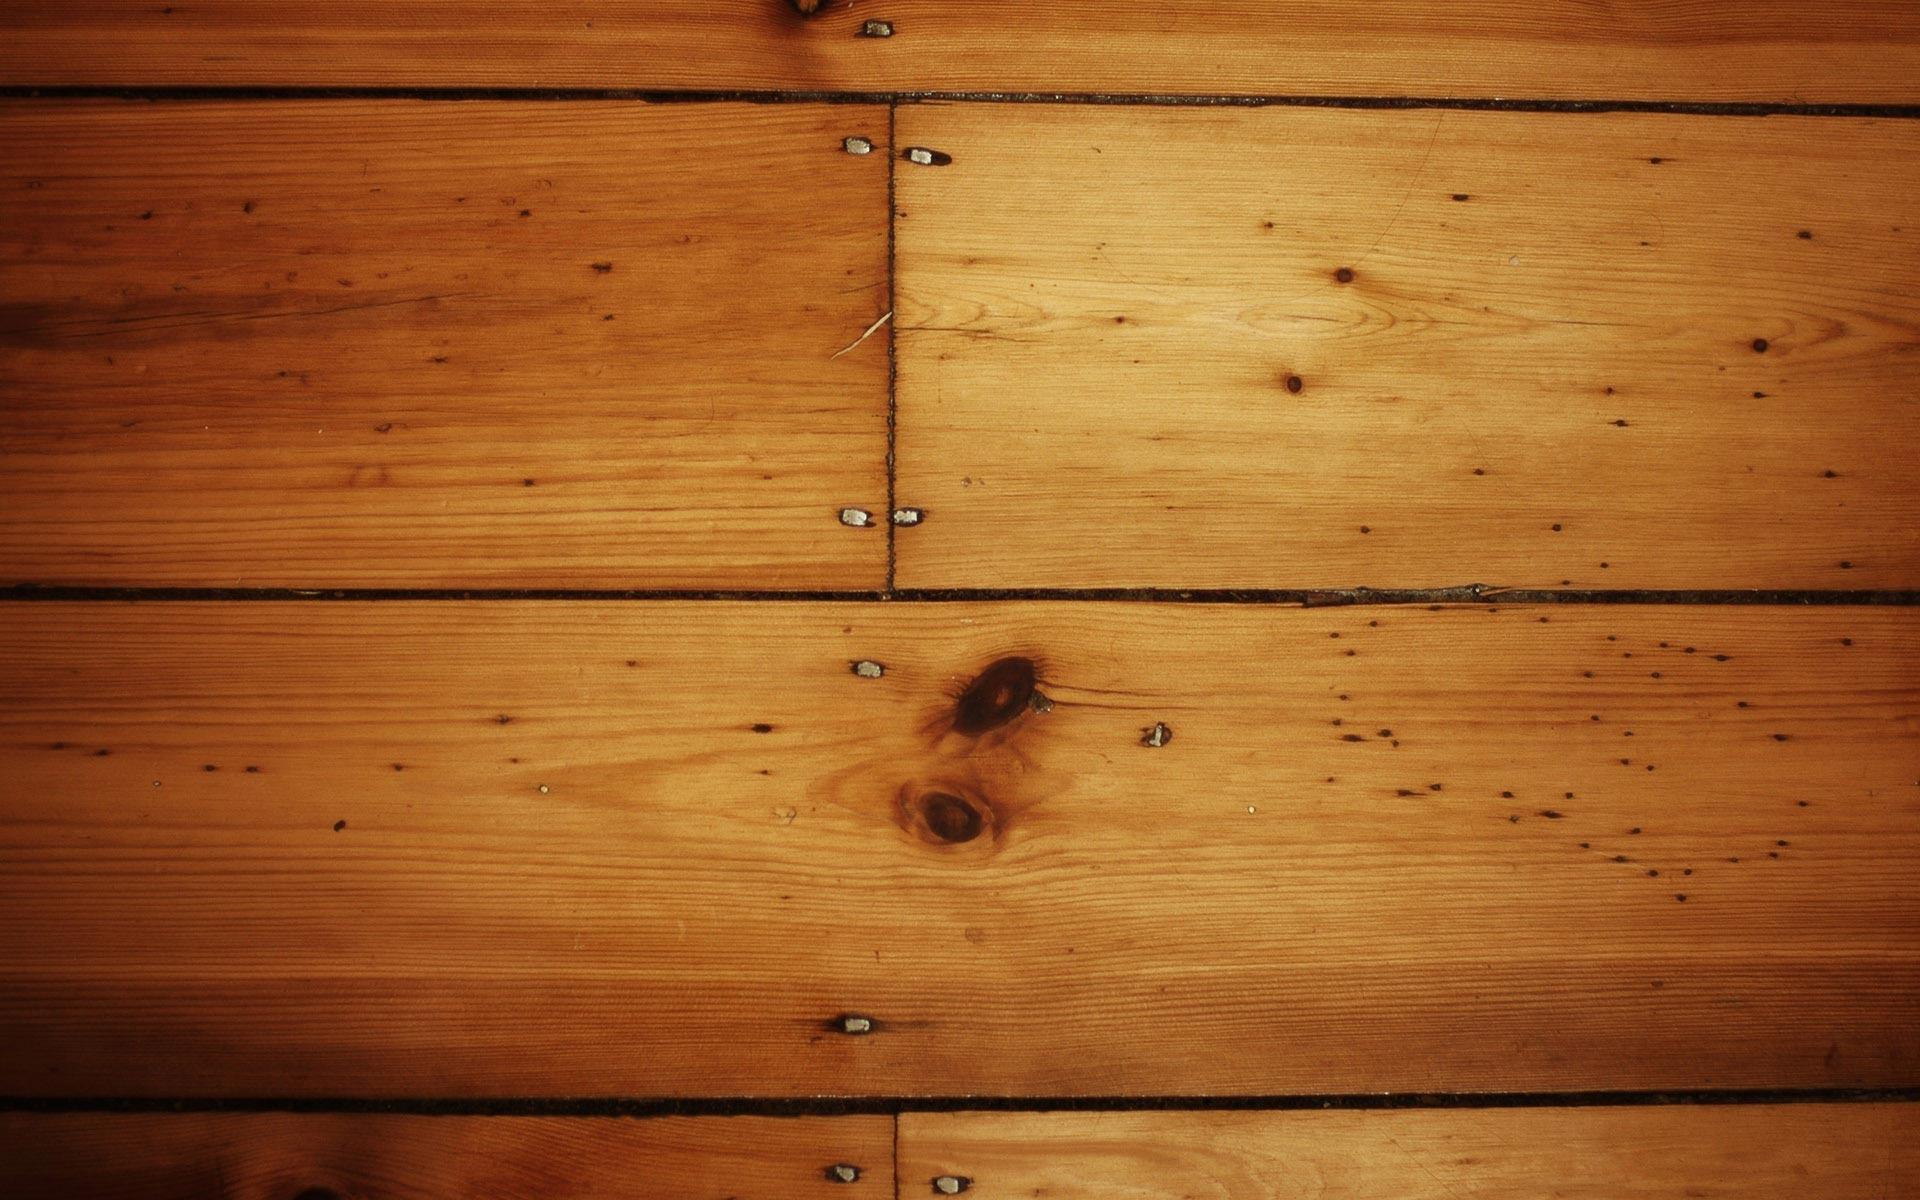 Wood Wallpaper and Background